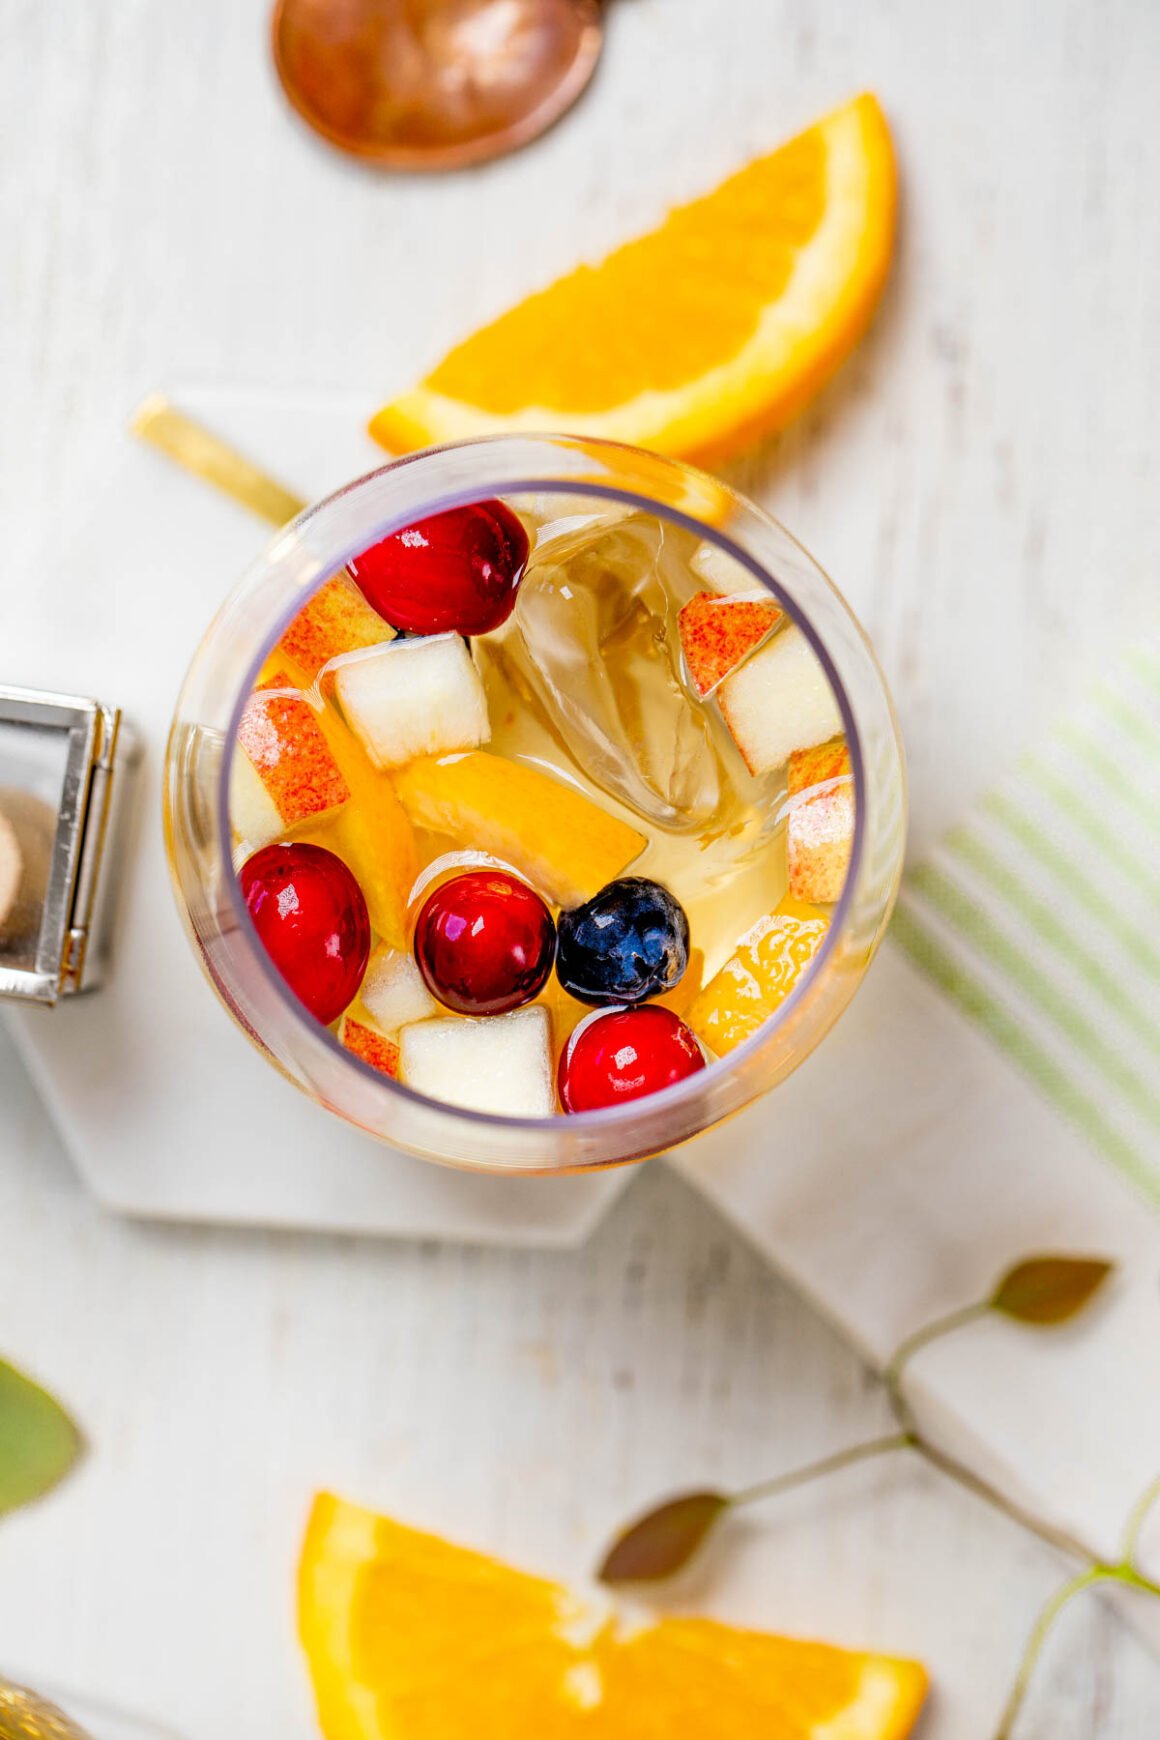 White Sangria is the perfect recipe for this summer and to celebrate this 4th of July with a refreshing, harmonious cocktail full of fruity flavor that everyone will love!

